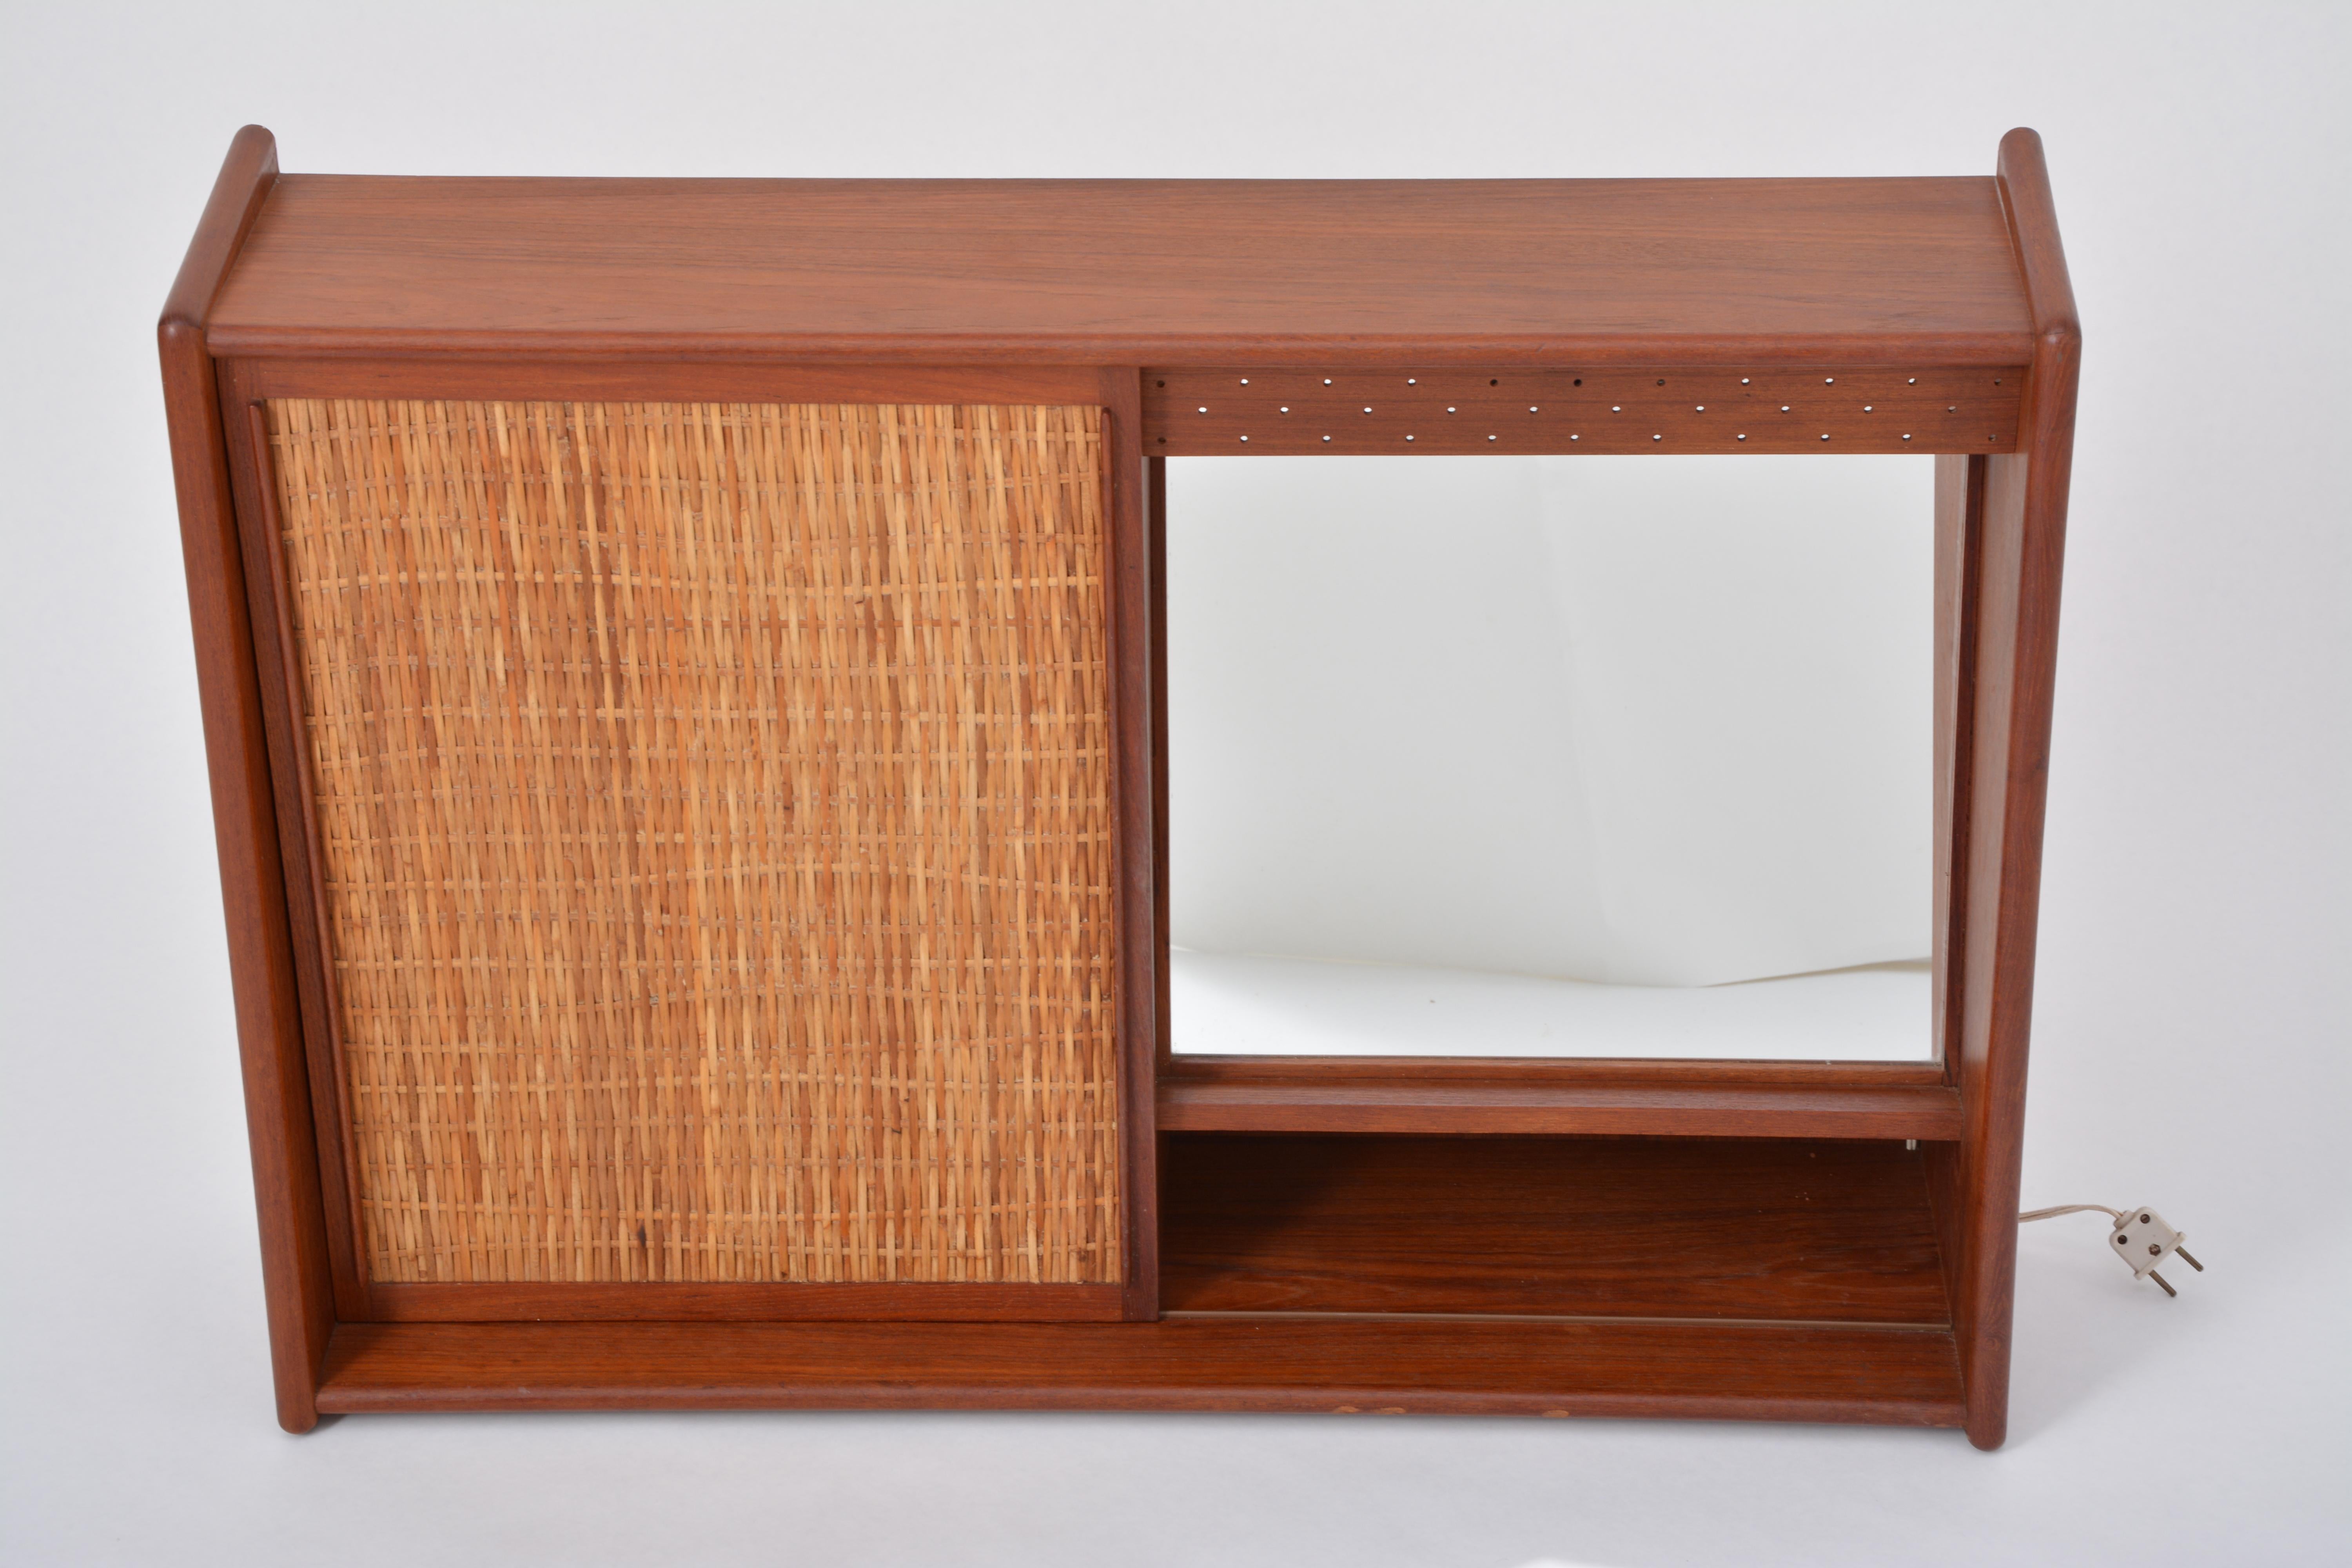 Danish Mid-Century Modern Teak bathroom cabinet with sliding door and mirror

This small bathroom cabinet is made of teak wood and was produced in Denmark, probably in the 1960s. It has one sliding door with a beautiful rattan front. The door covers